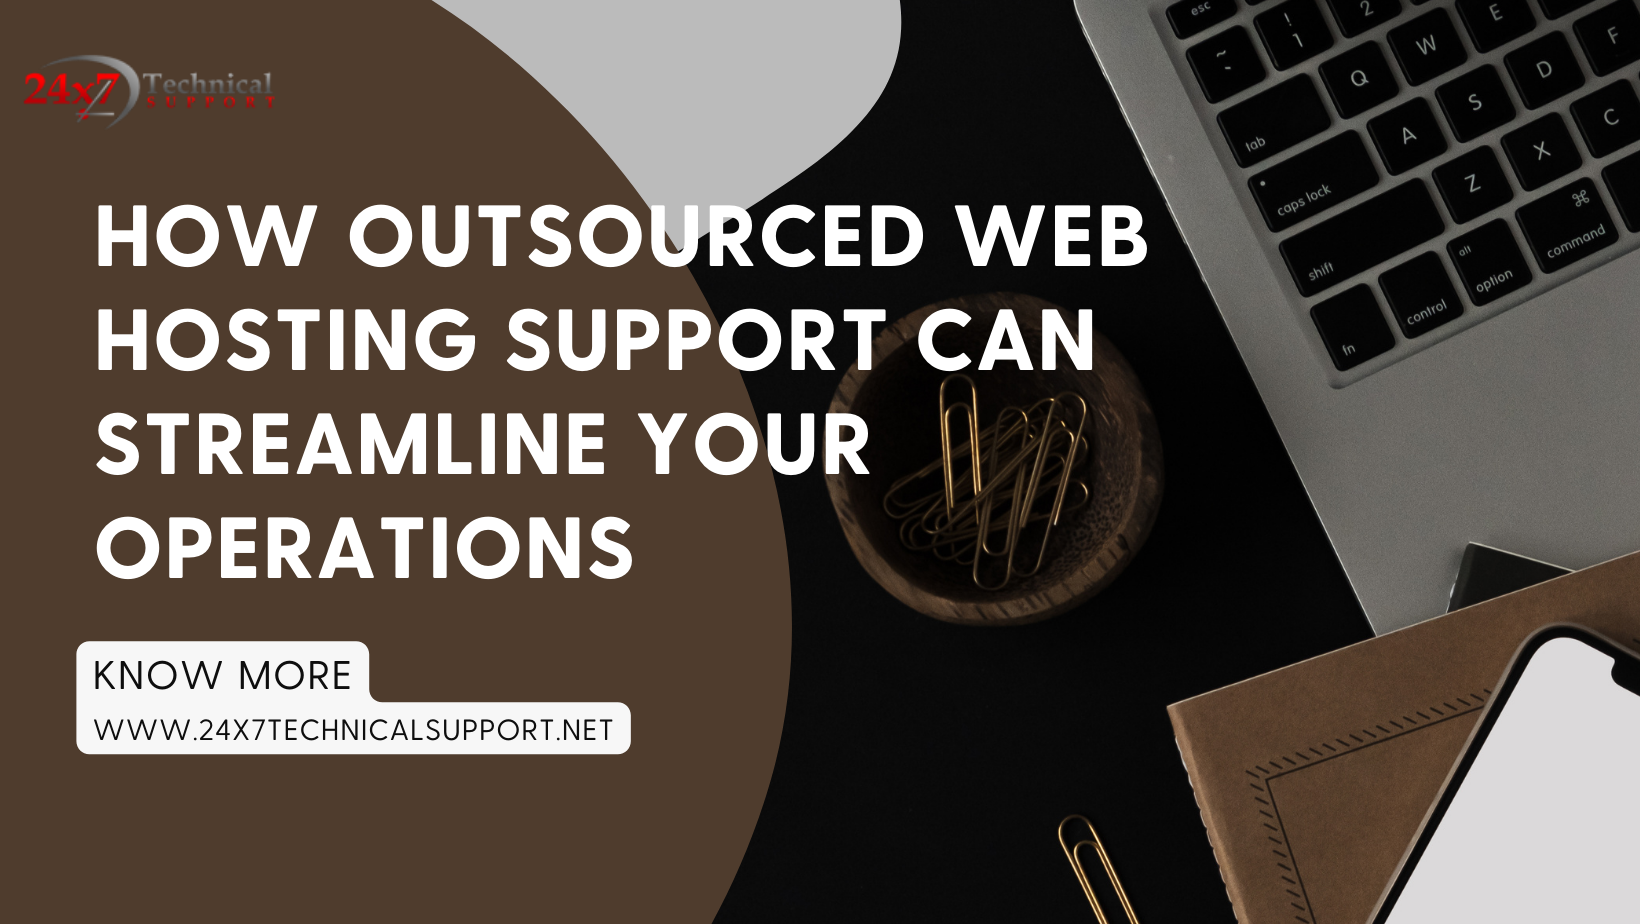 OUTSOURCED WEBHOSTING SUPPORT